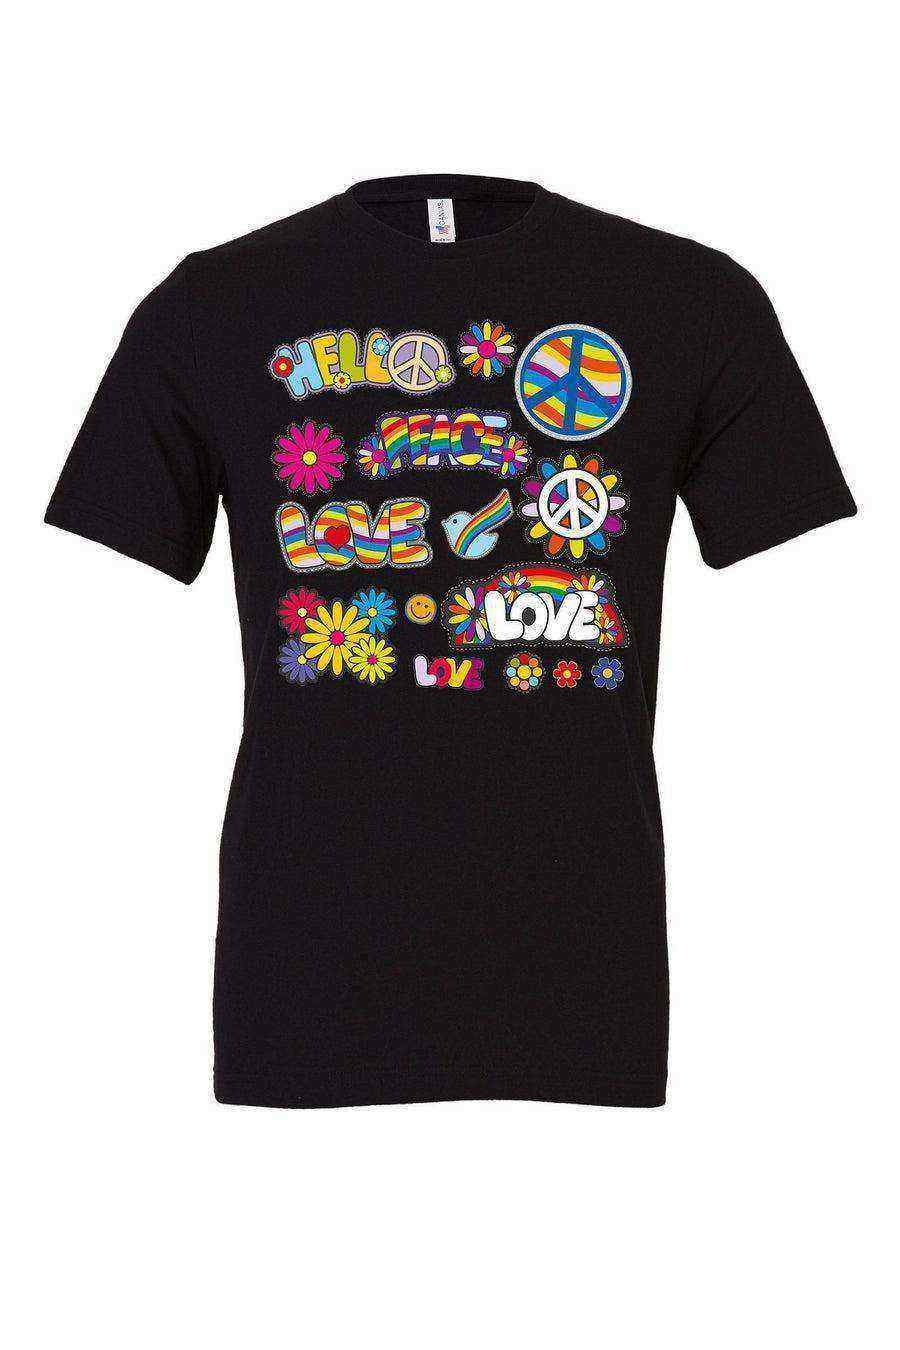 Groovy Patches Shirt | Retro Patches Shirt - Dylan's Tees